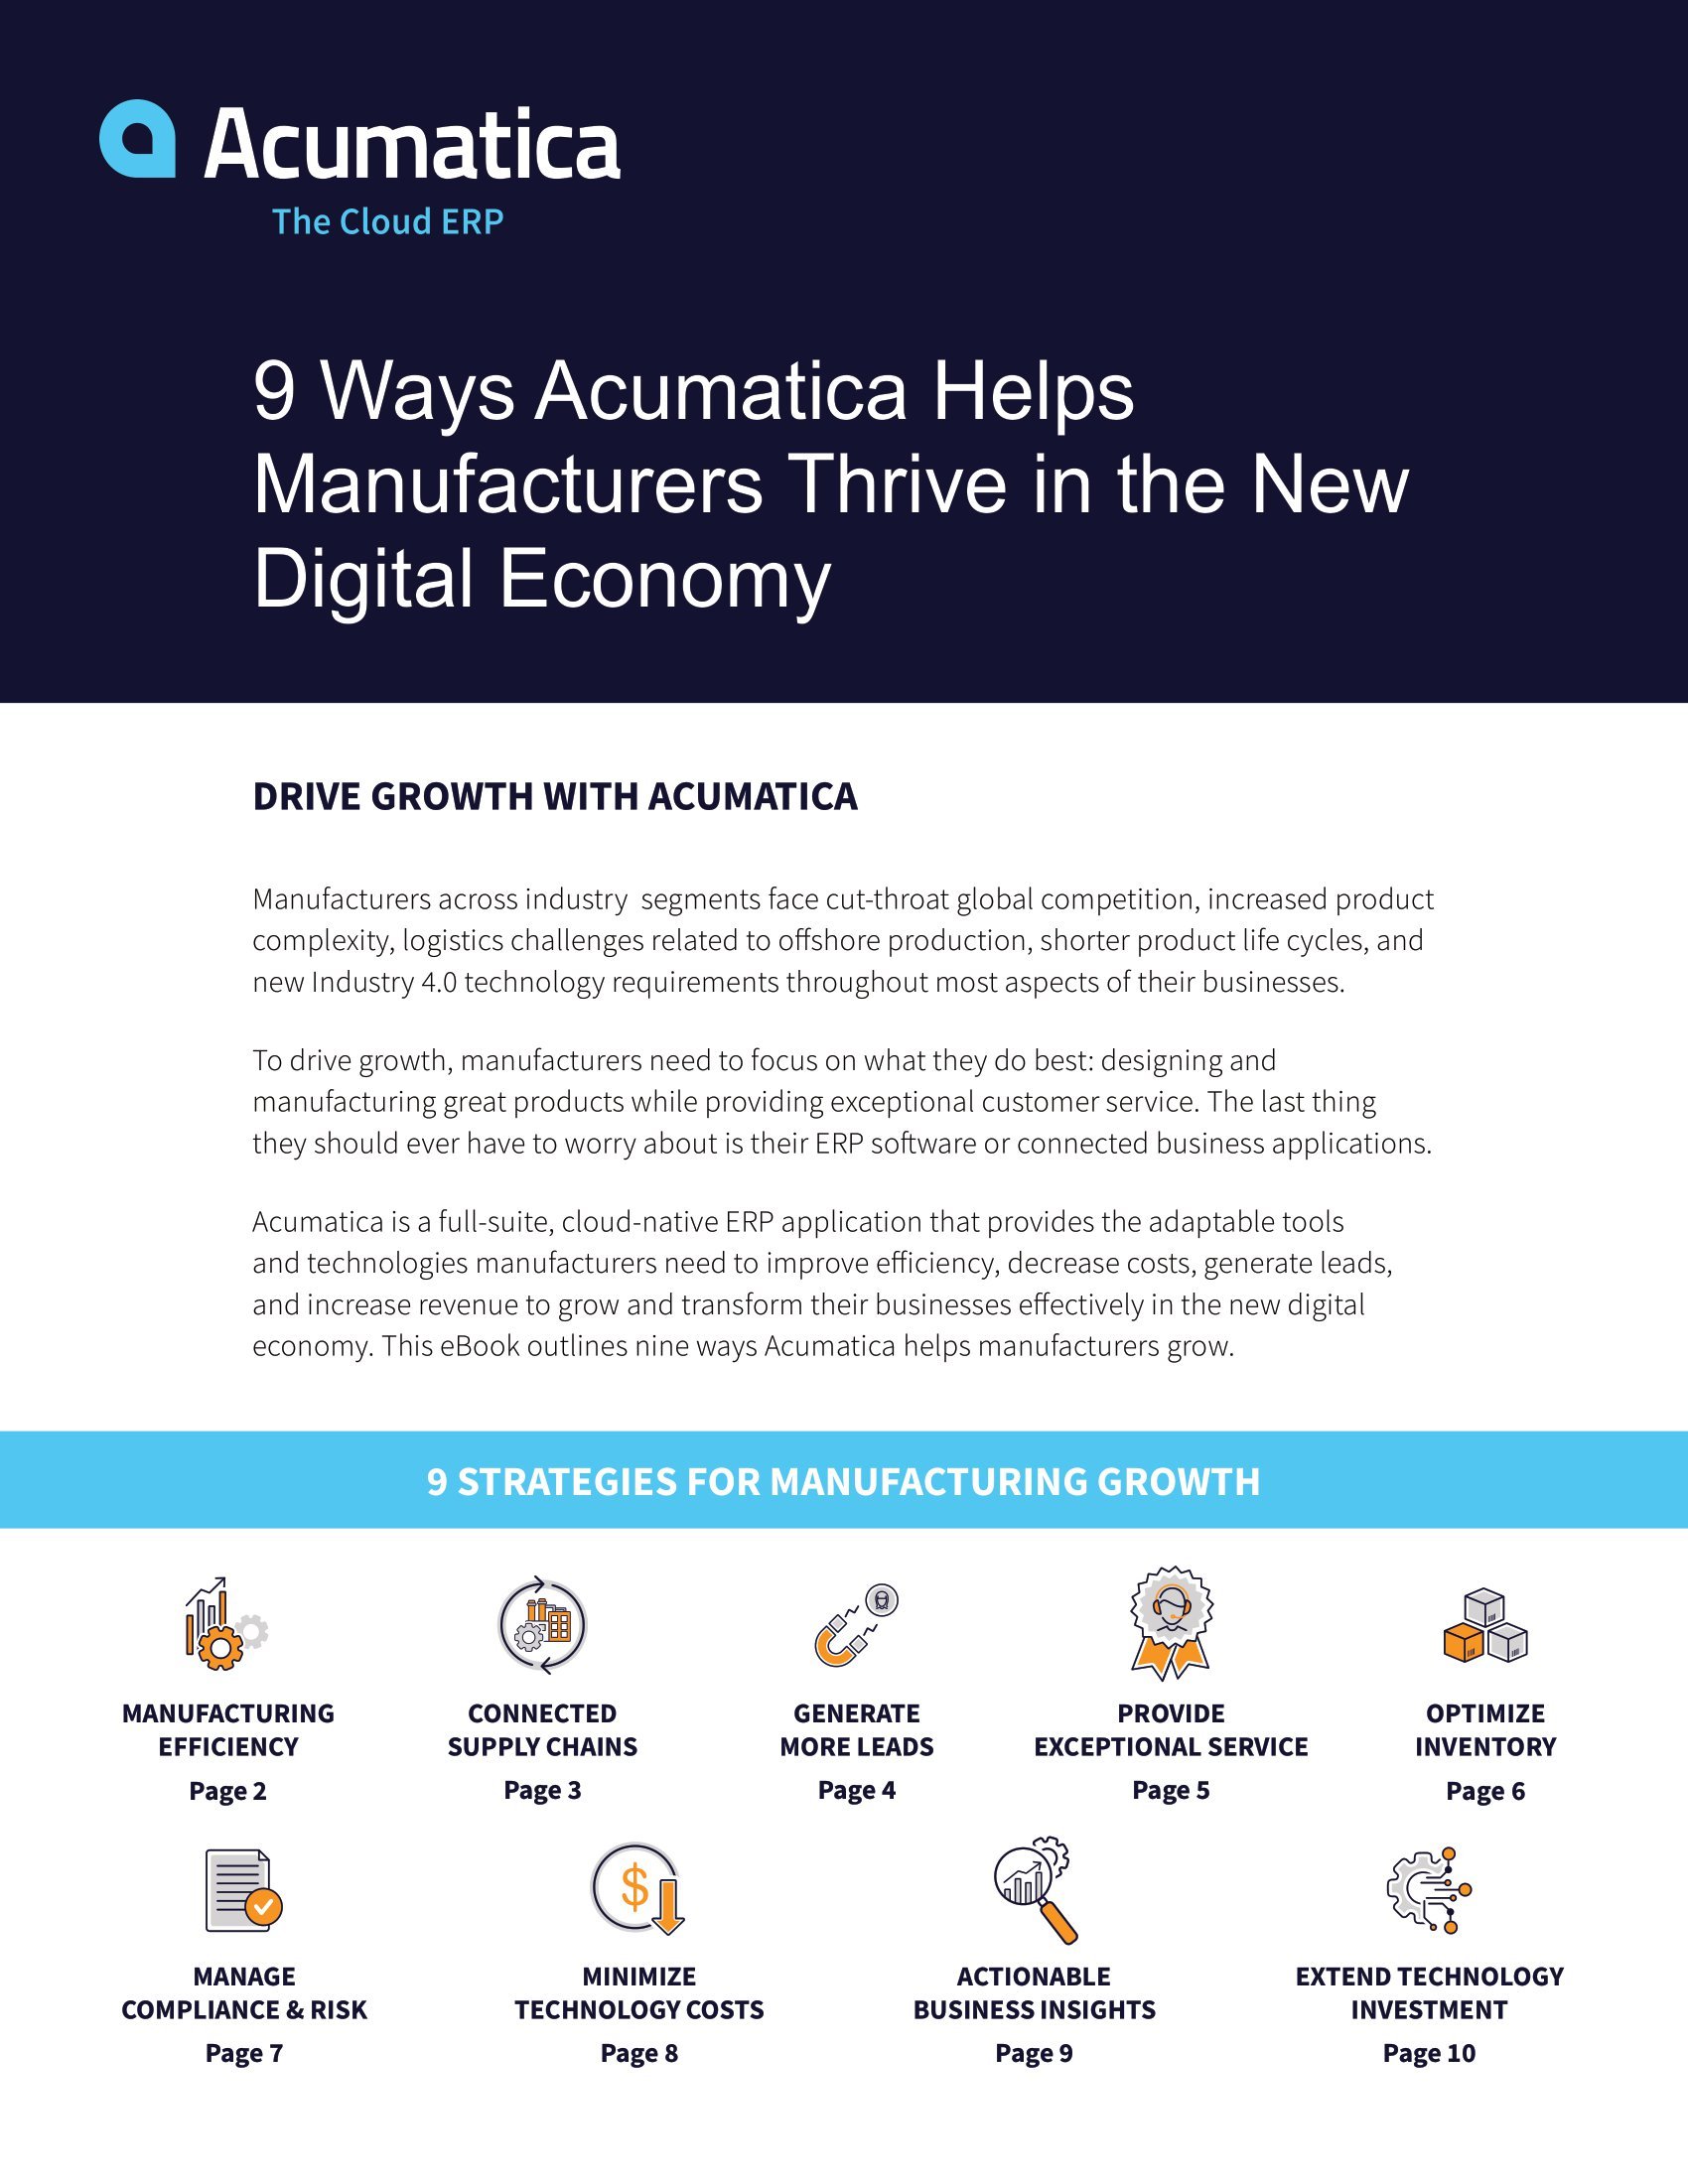 Nine Ways to Drive Manufacturing Growth in a Digital Economy